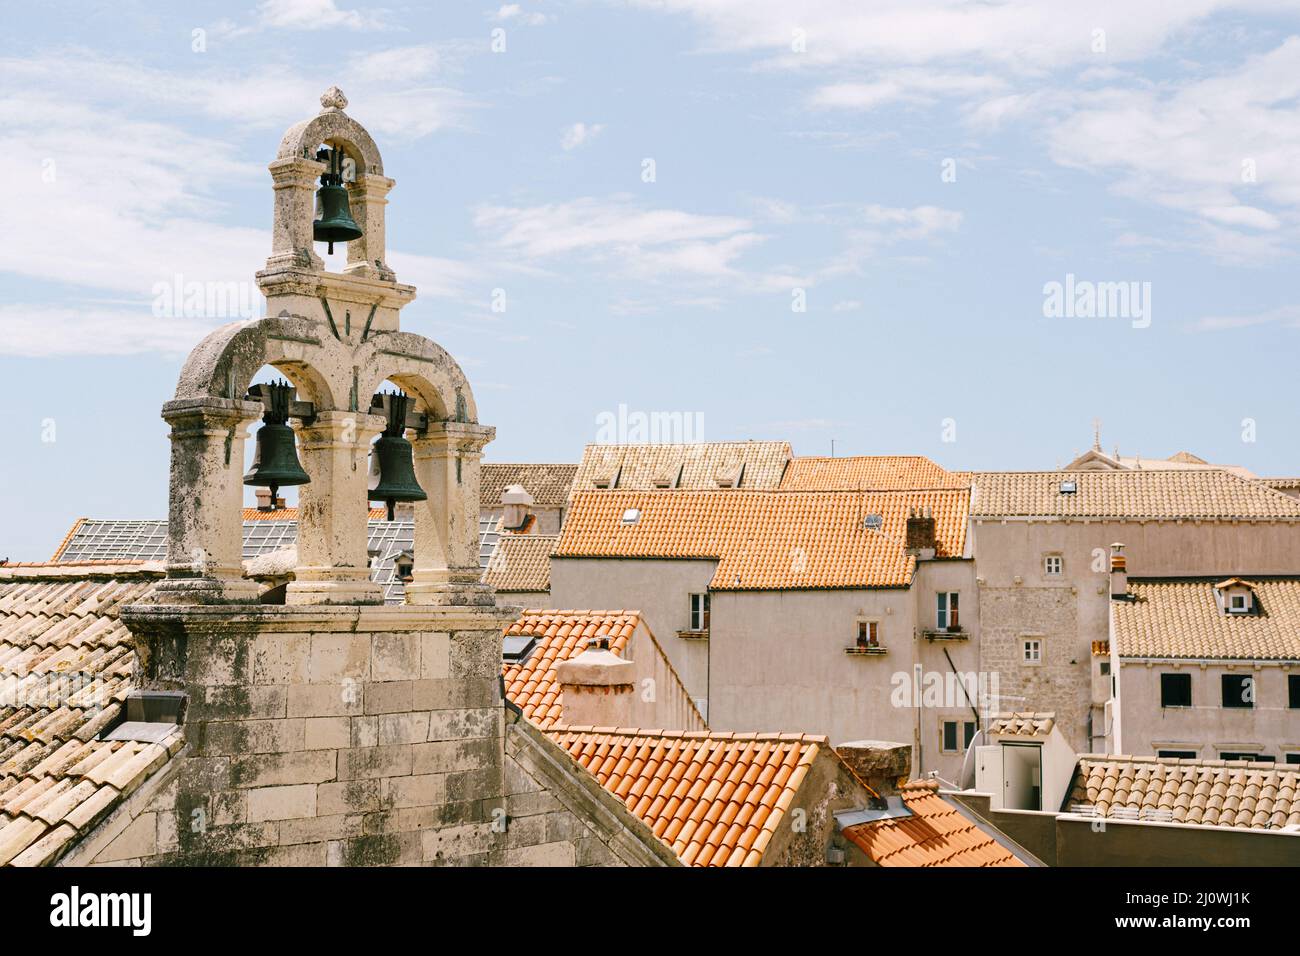 Three bells on an old stone bell tower among the tiled roofs of city buildings Stock Photo